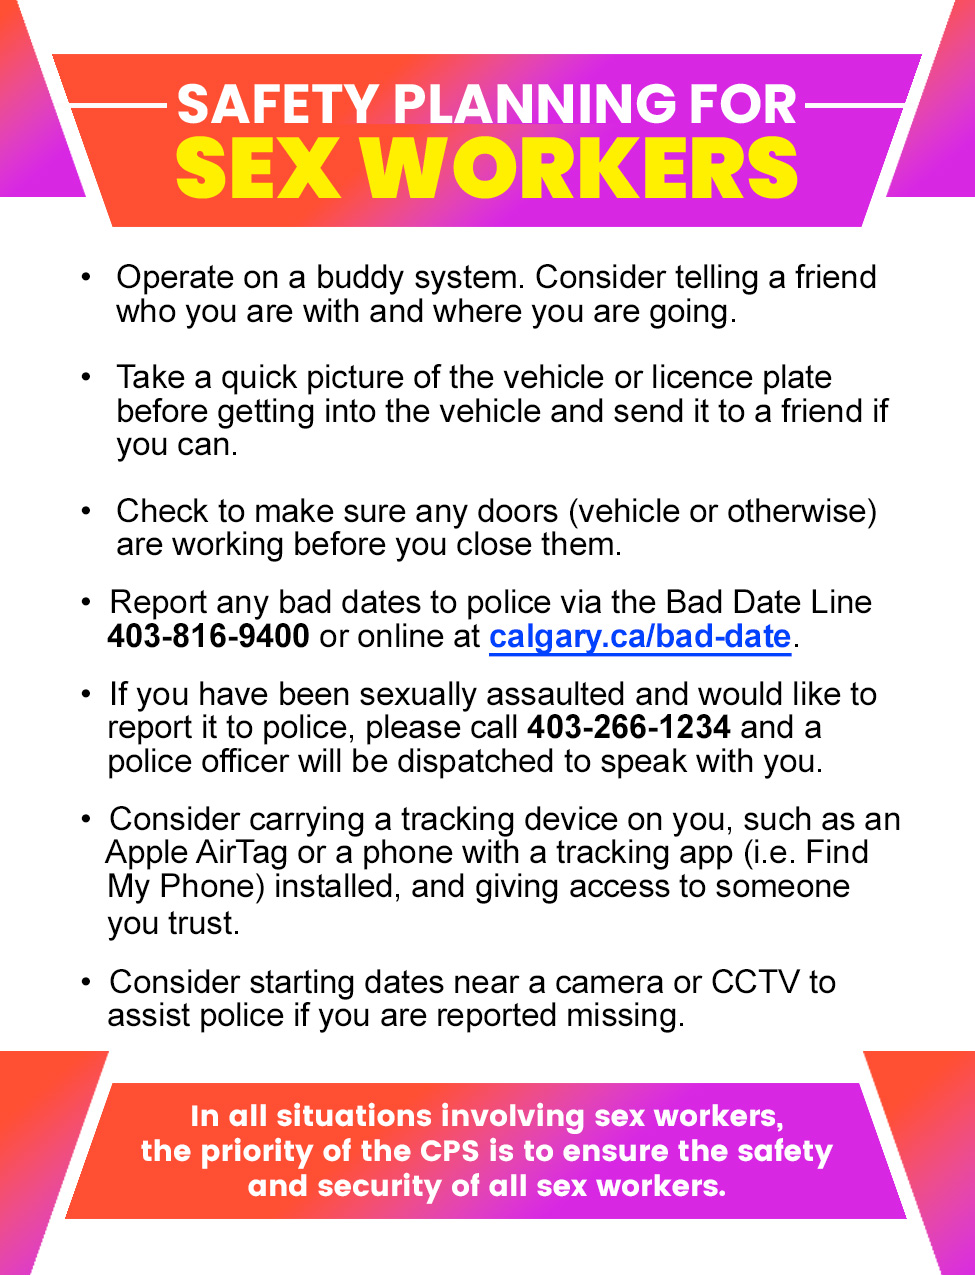 Sex Trade Worker - Safety and Planning heading image